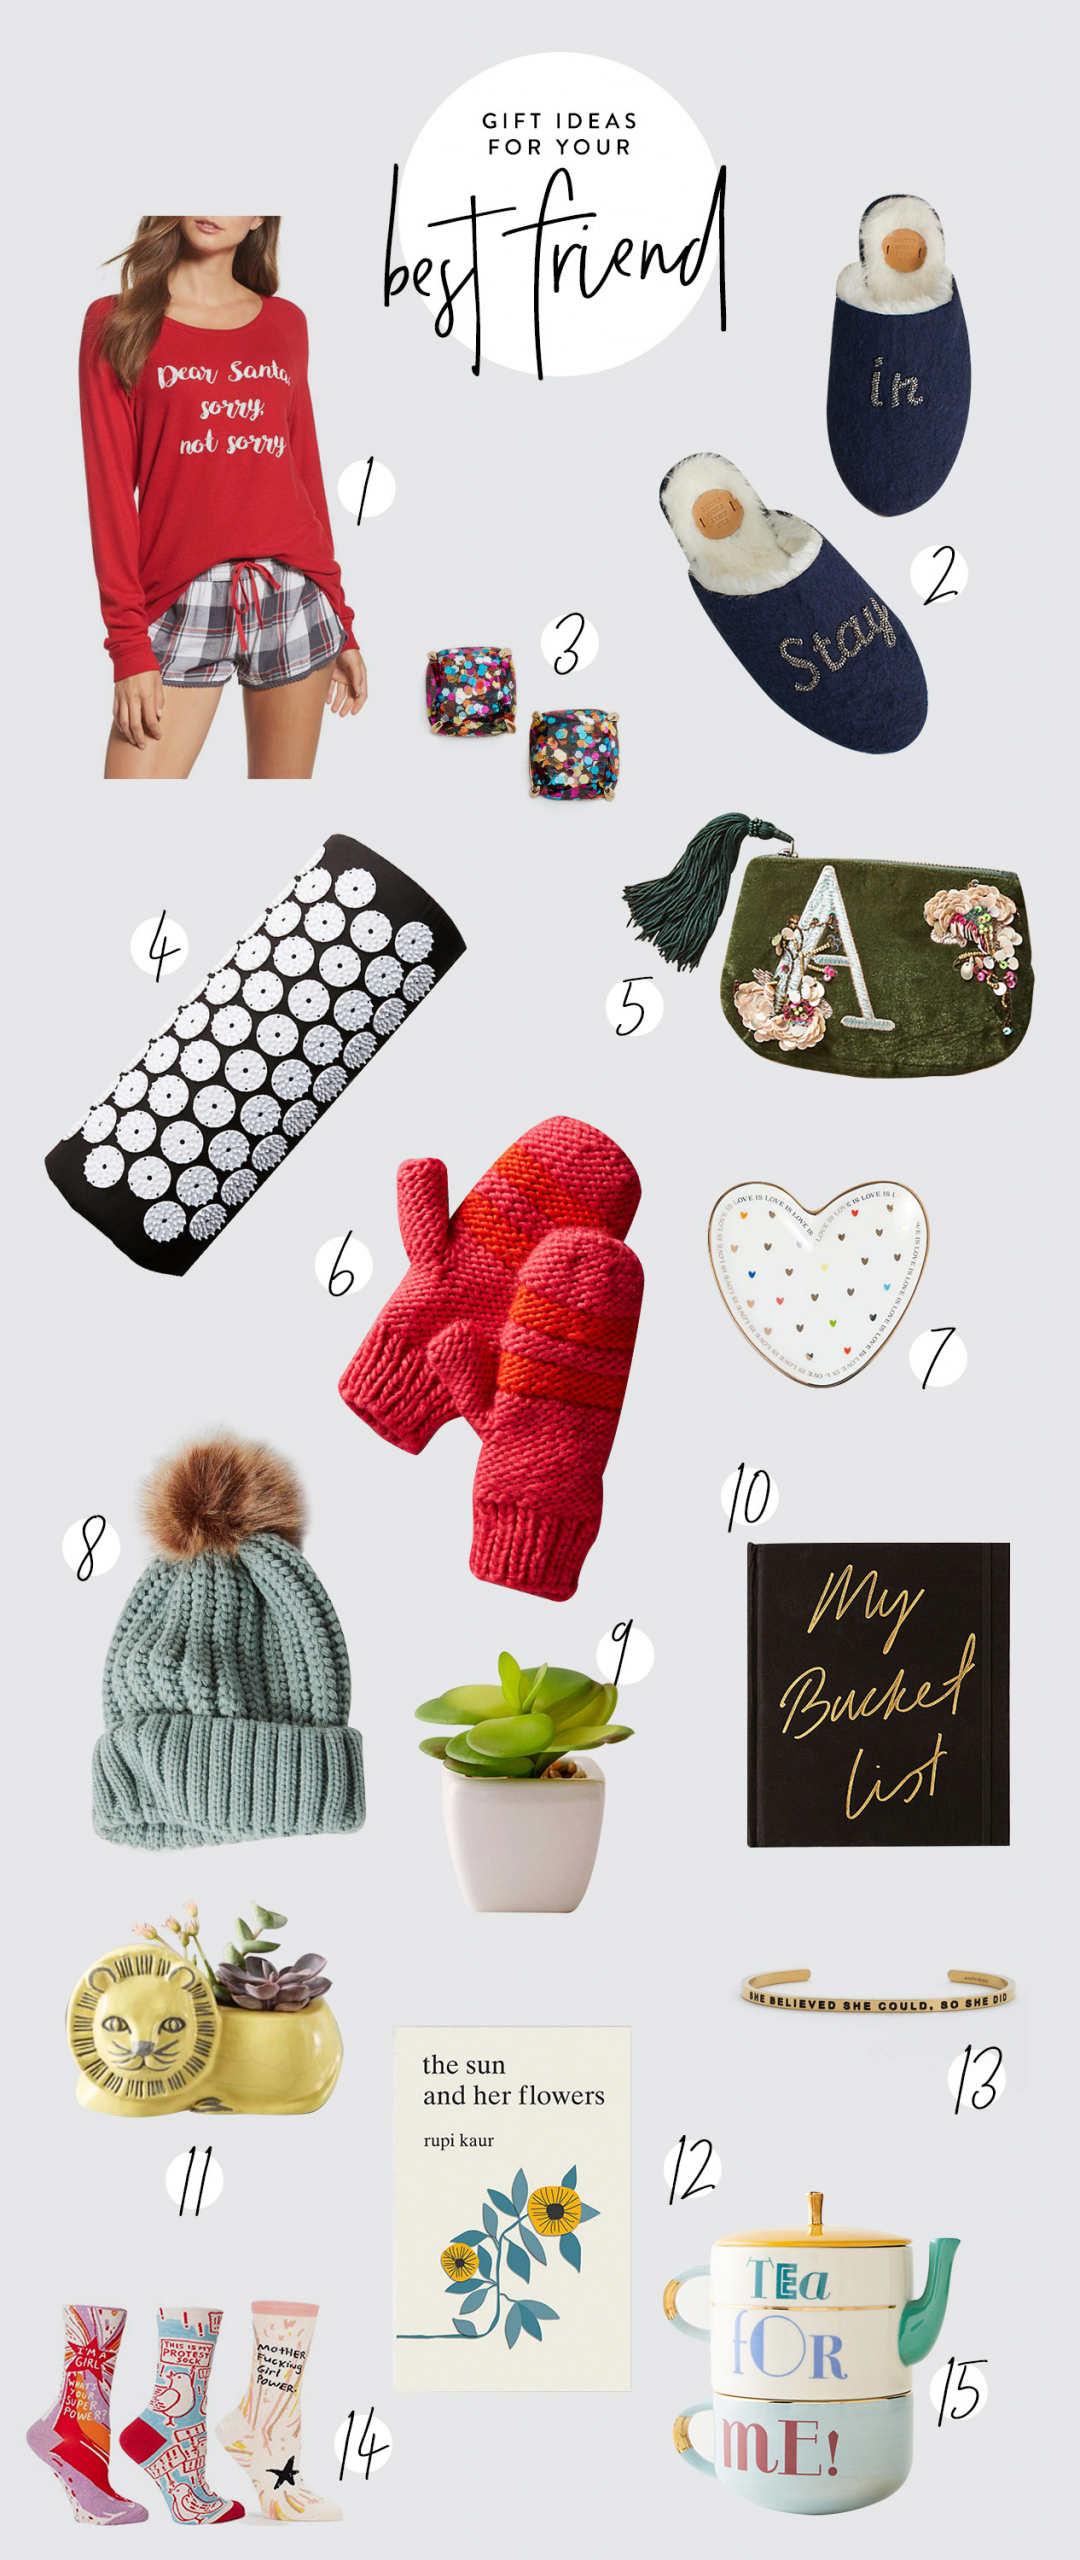 Holiday Gift Ideas For Your Best Friend
 The Ultimate Guide for Holiday Gift Ideas